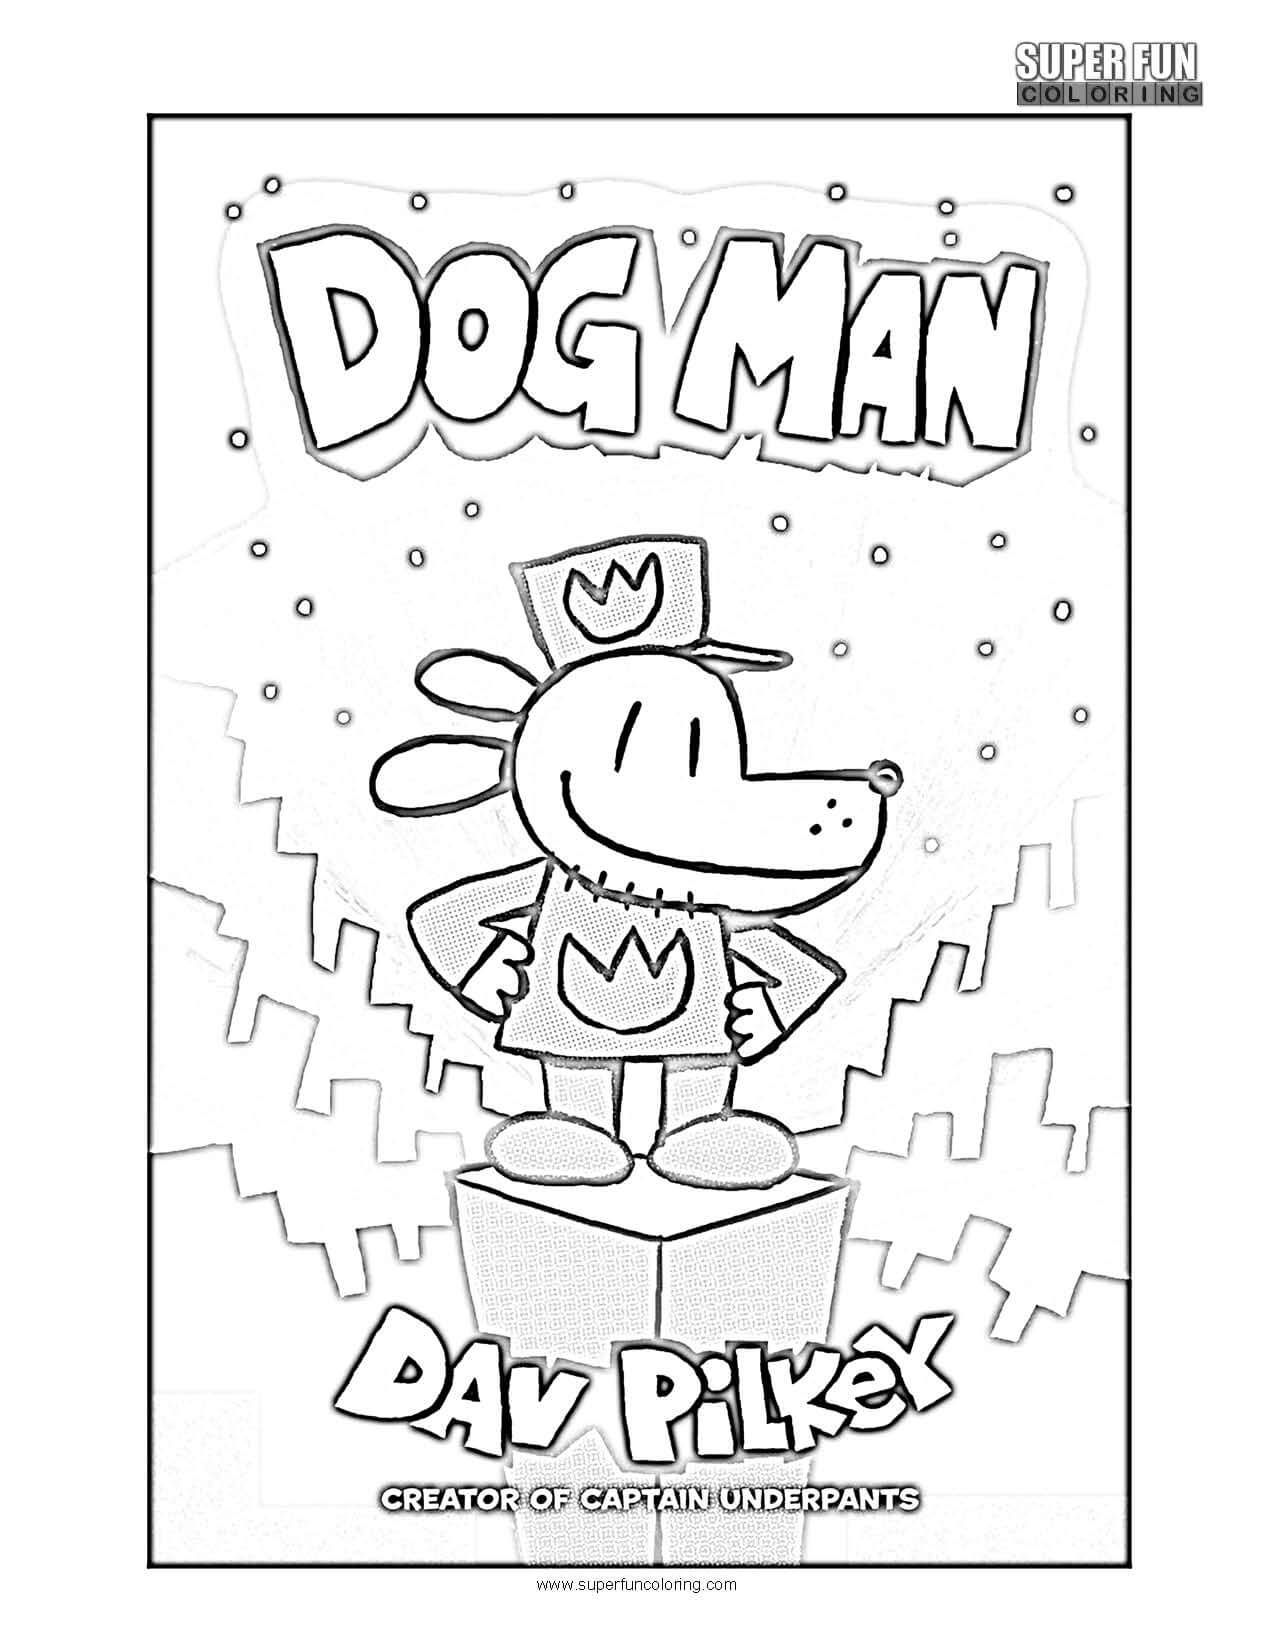 Dogman coloring page